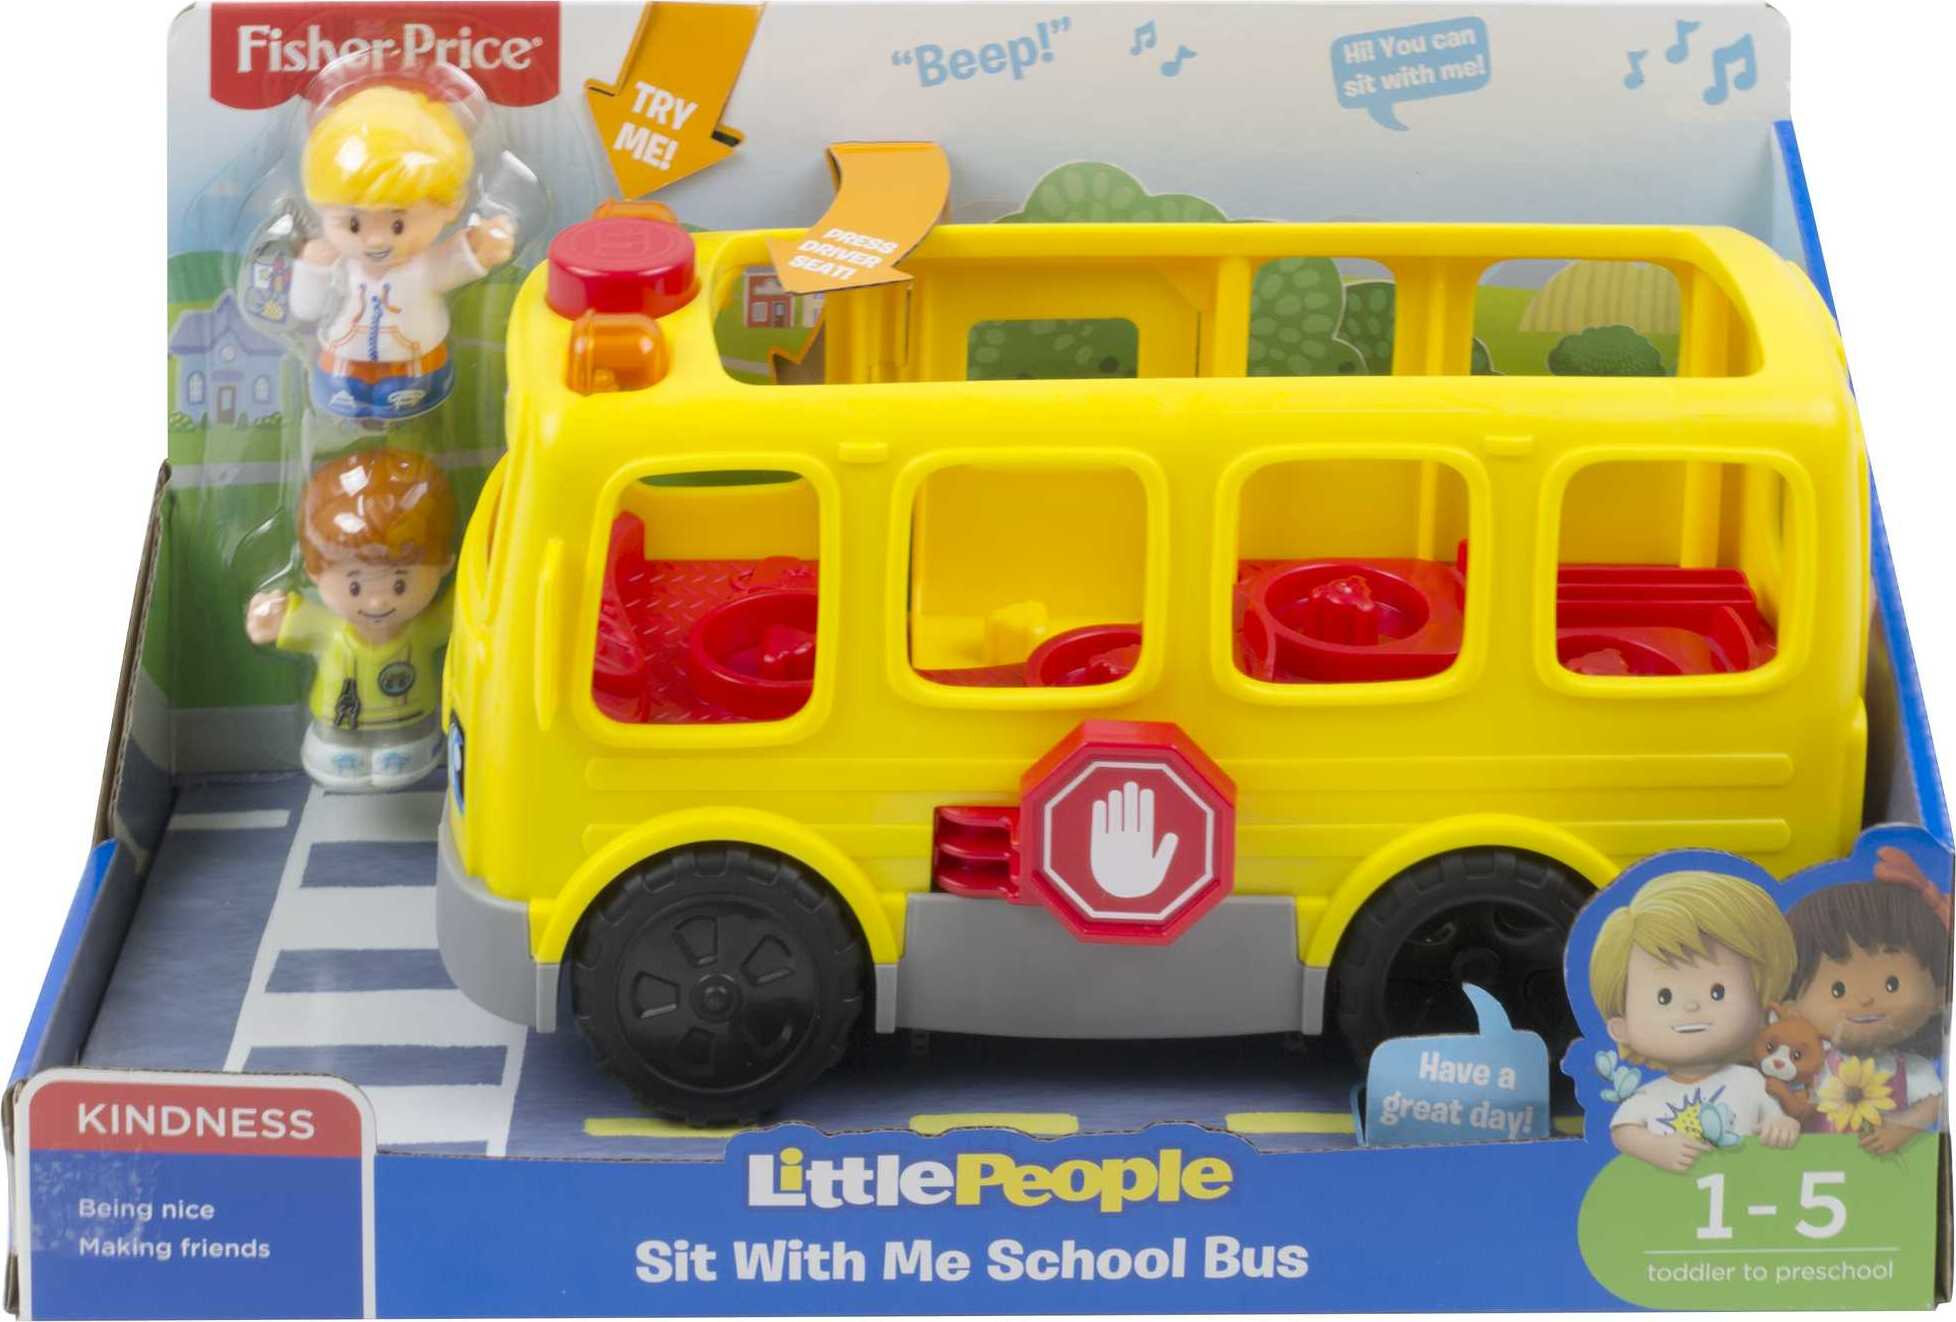 Little People Musical Toddler Toy Sit with Me School Bus with Lights Sounds for Ages 1+ Years - image 7 of 8